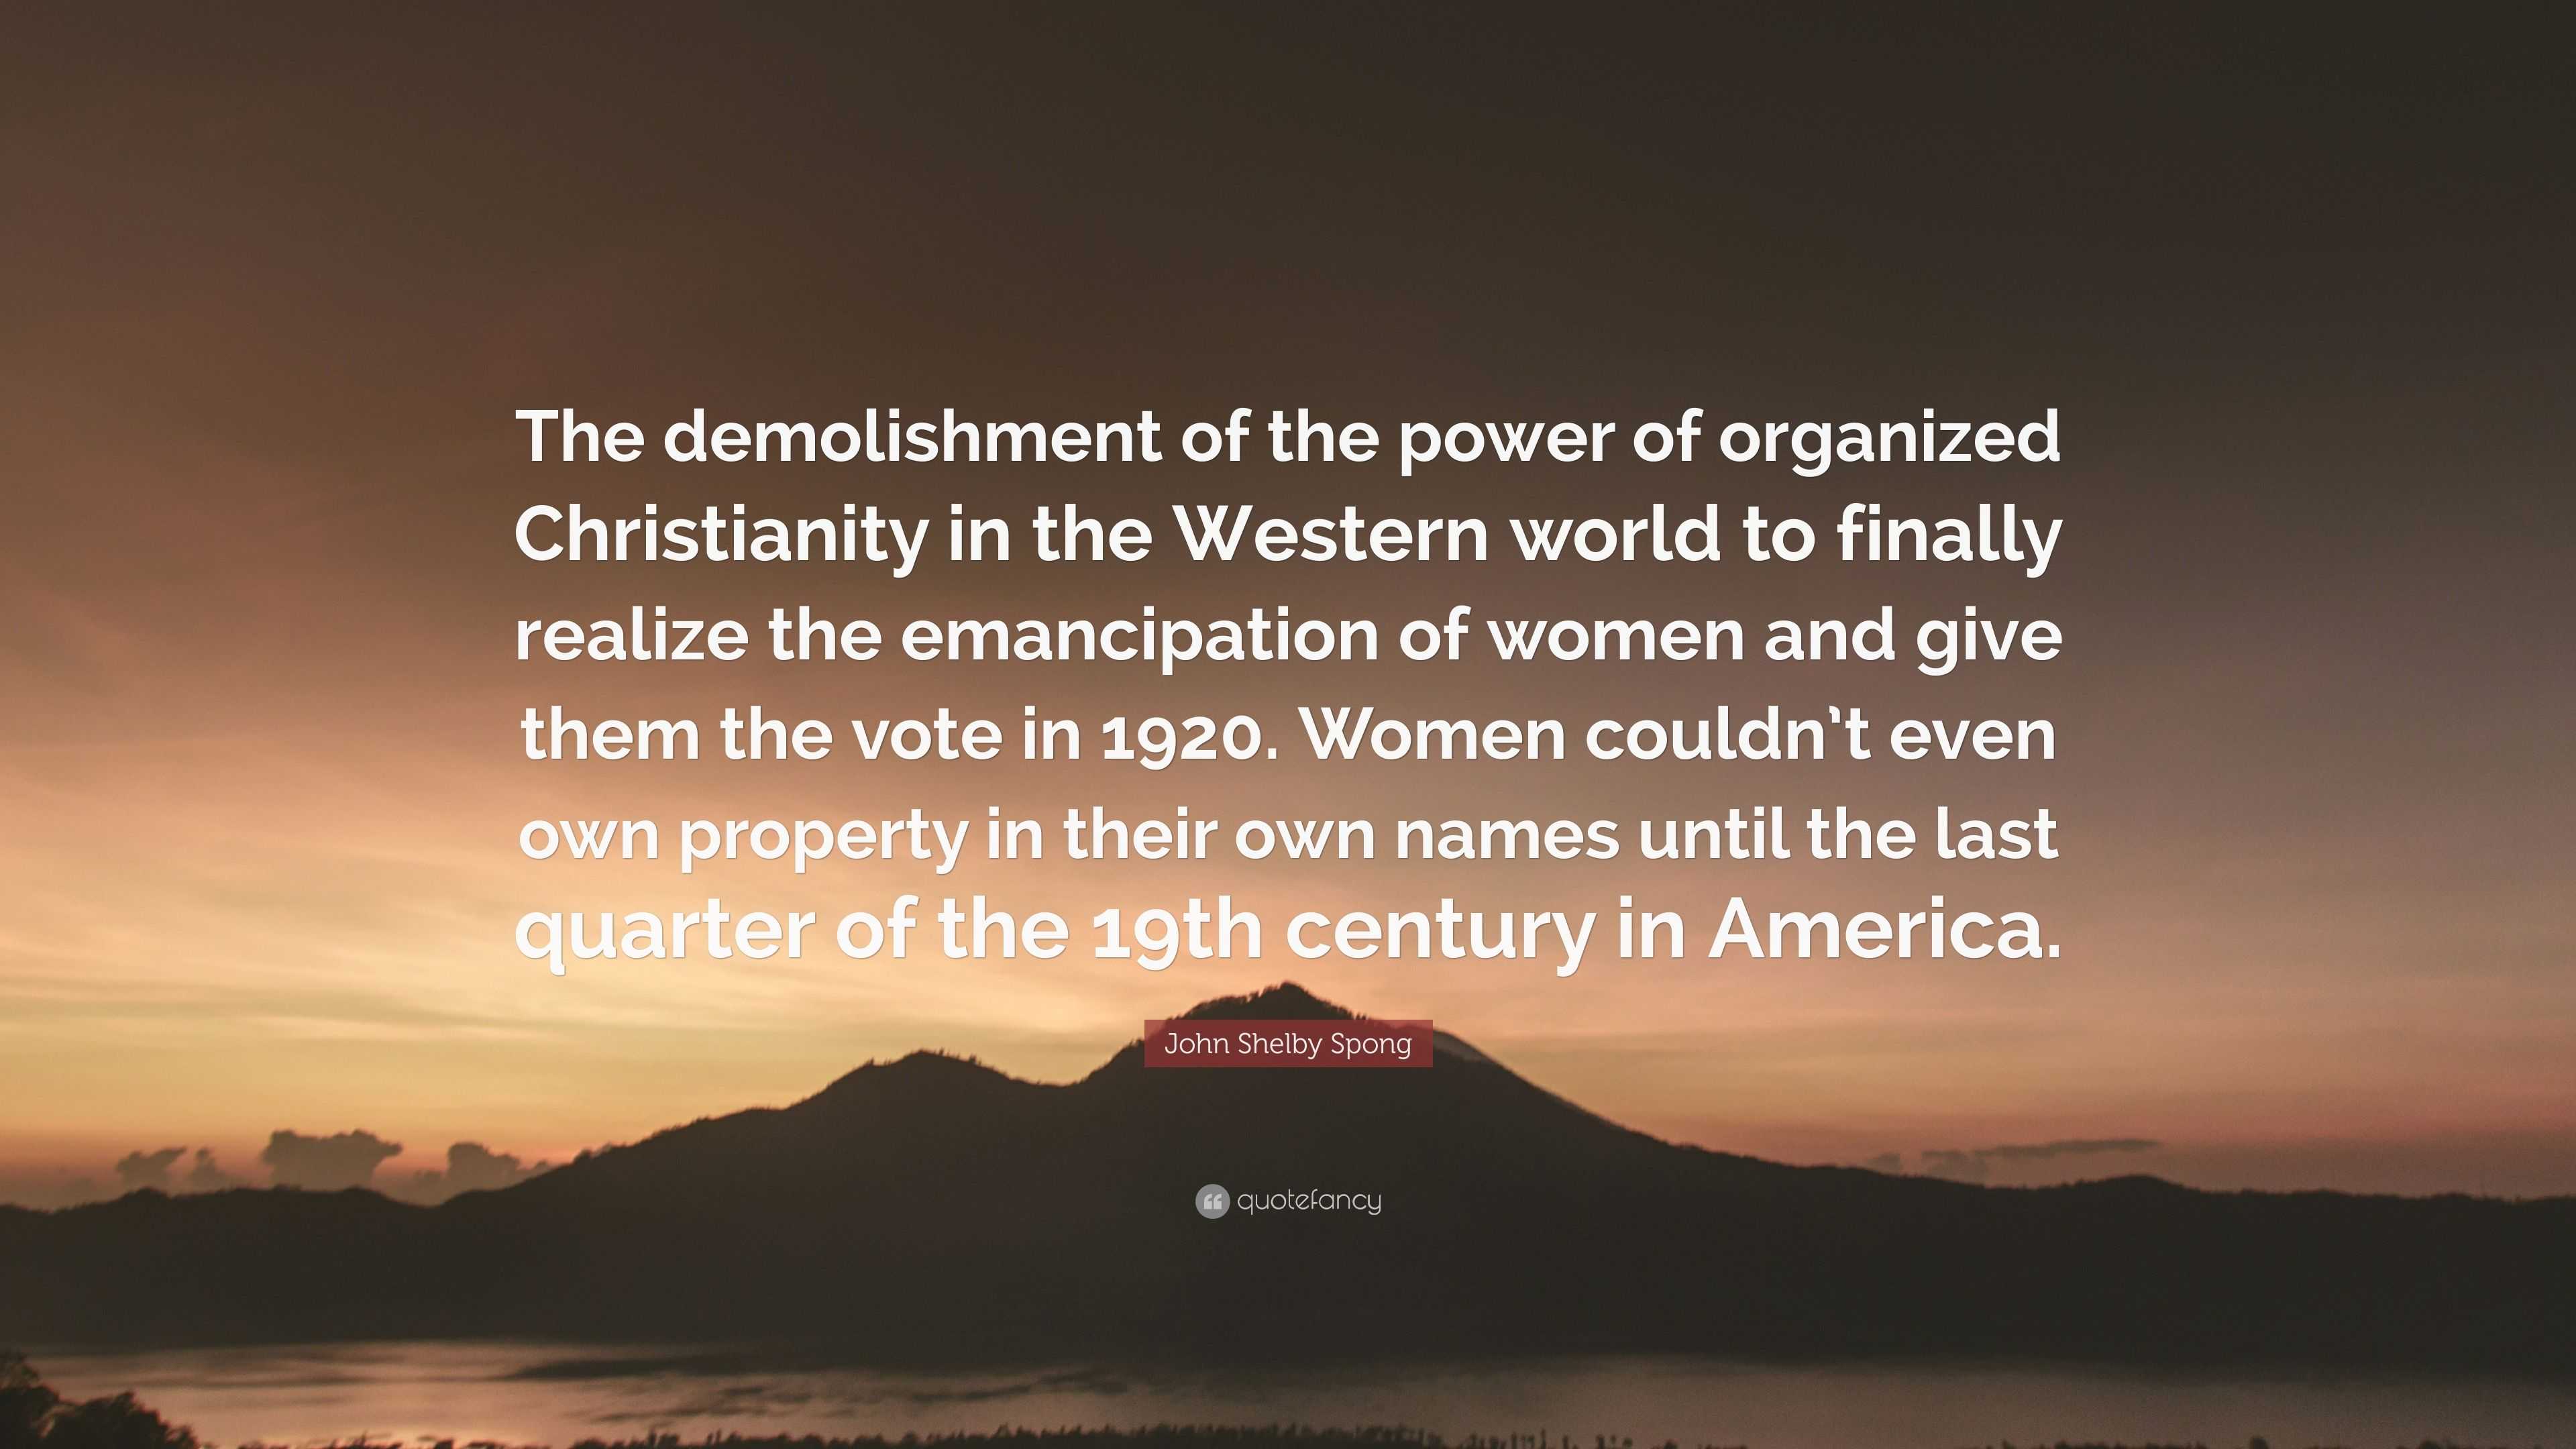 John Shelby Spong Quote: “The demolishment of the power of organized  Christianity in the Western world to finally realize the emancipation of  wome”